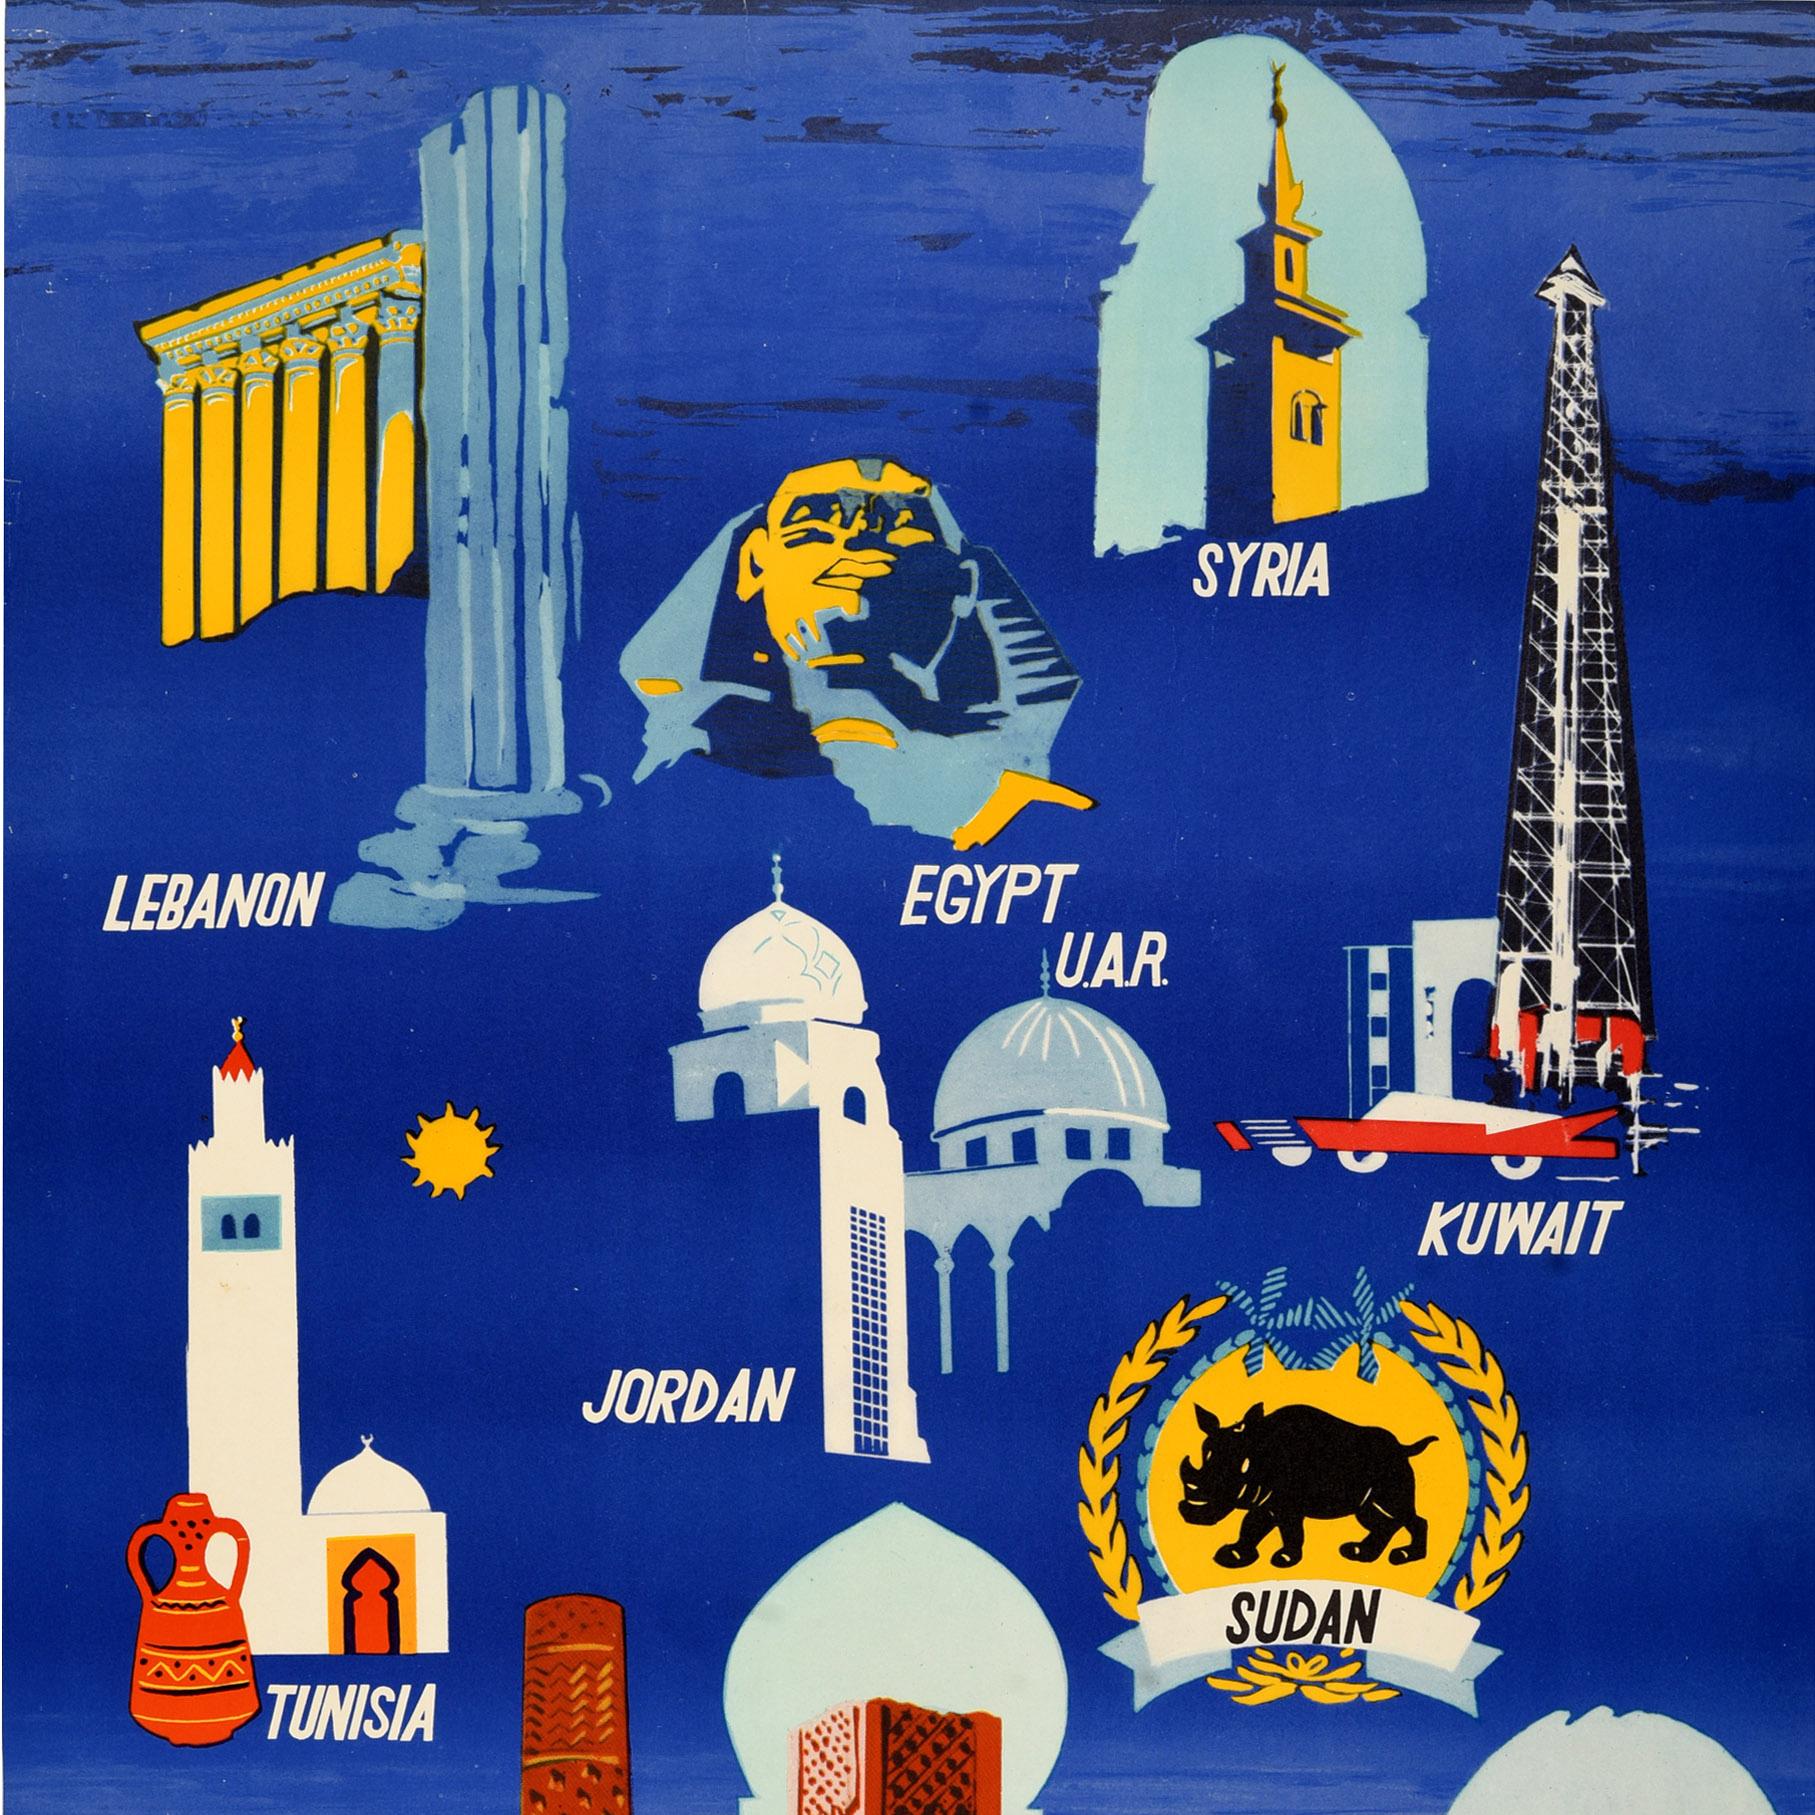 Original vintage travel poster - Visit the Arab States - featuring illustrations of iconic architecture and ancient and historical monuments including the Pillars of the Temple of Jupiter in Lebanon, a Sphinx head in Egypt UAR, the Umayyad Mosque in